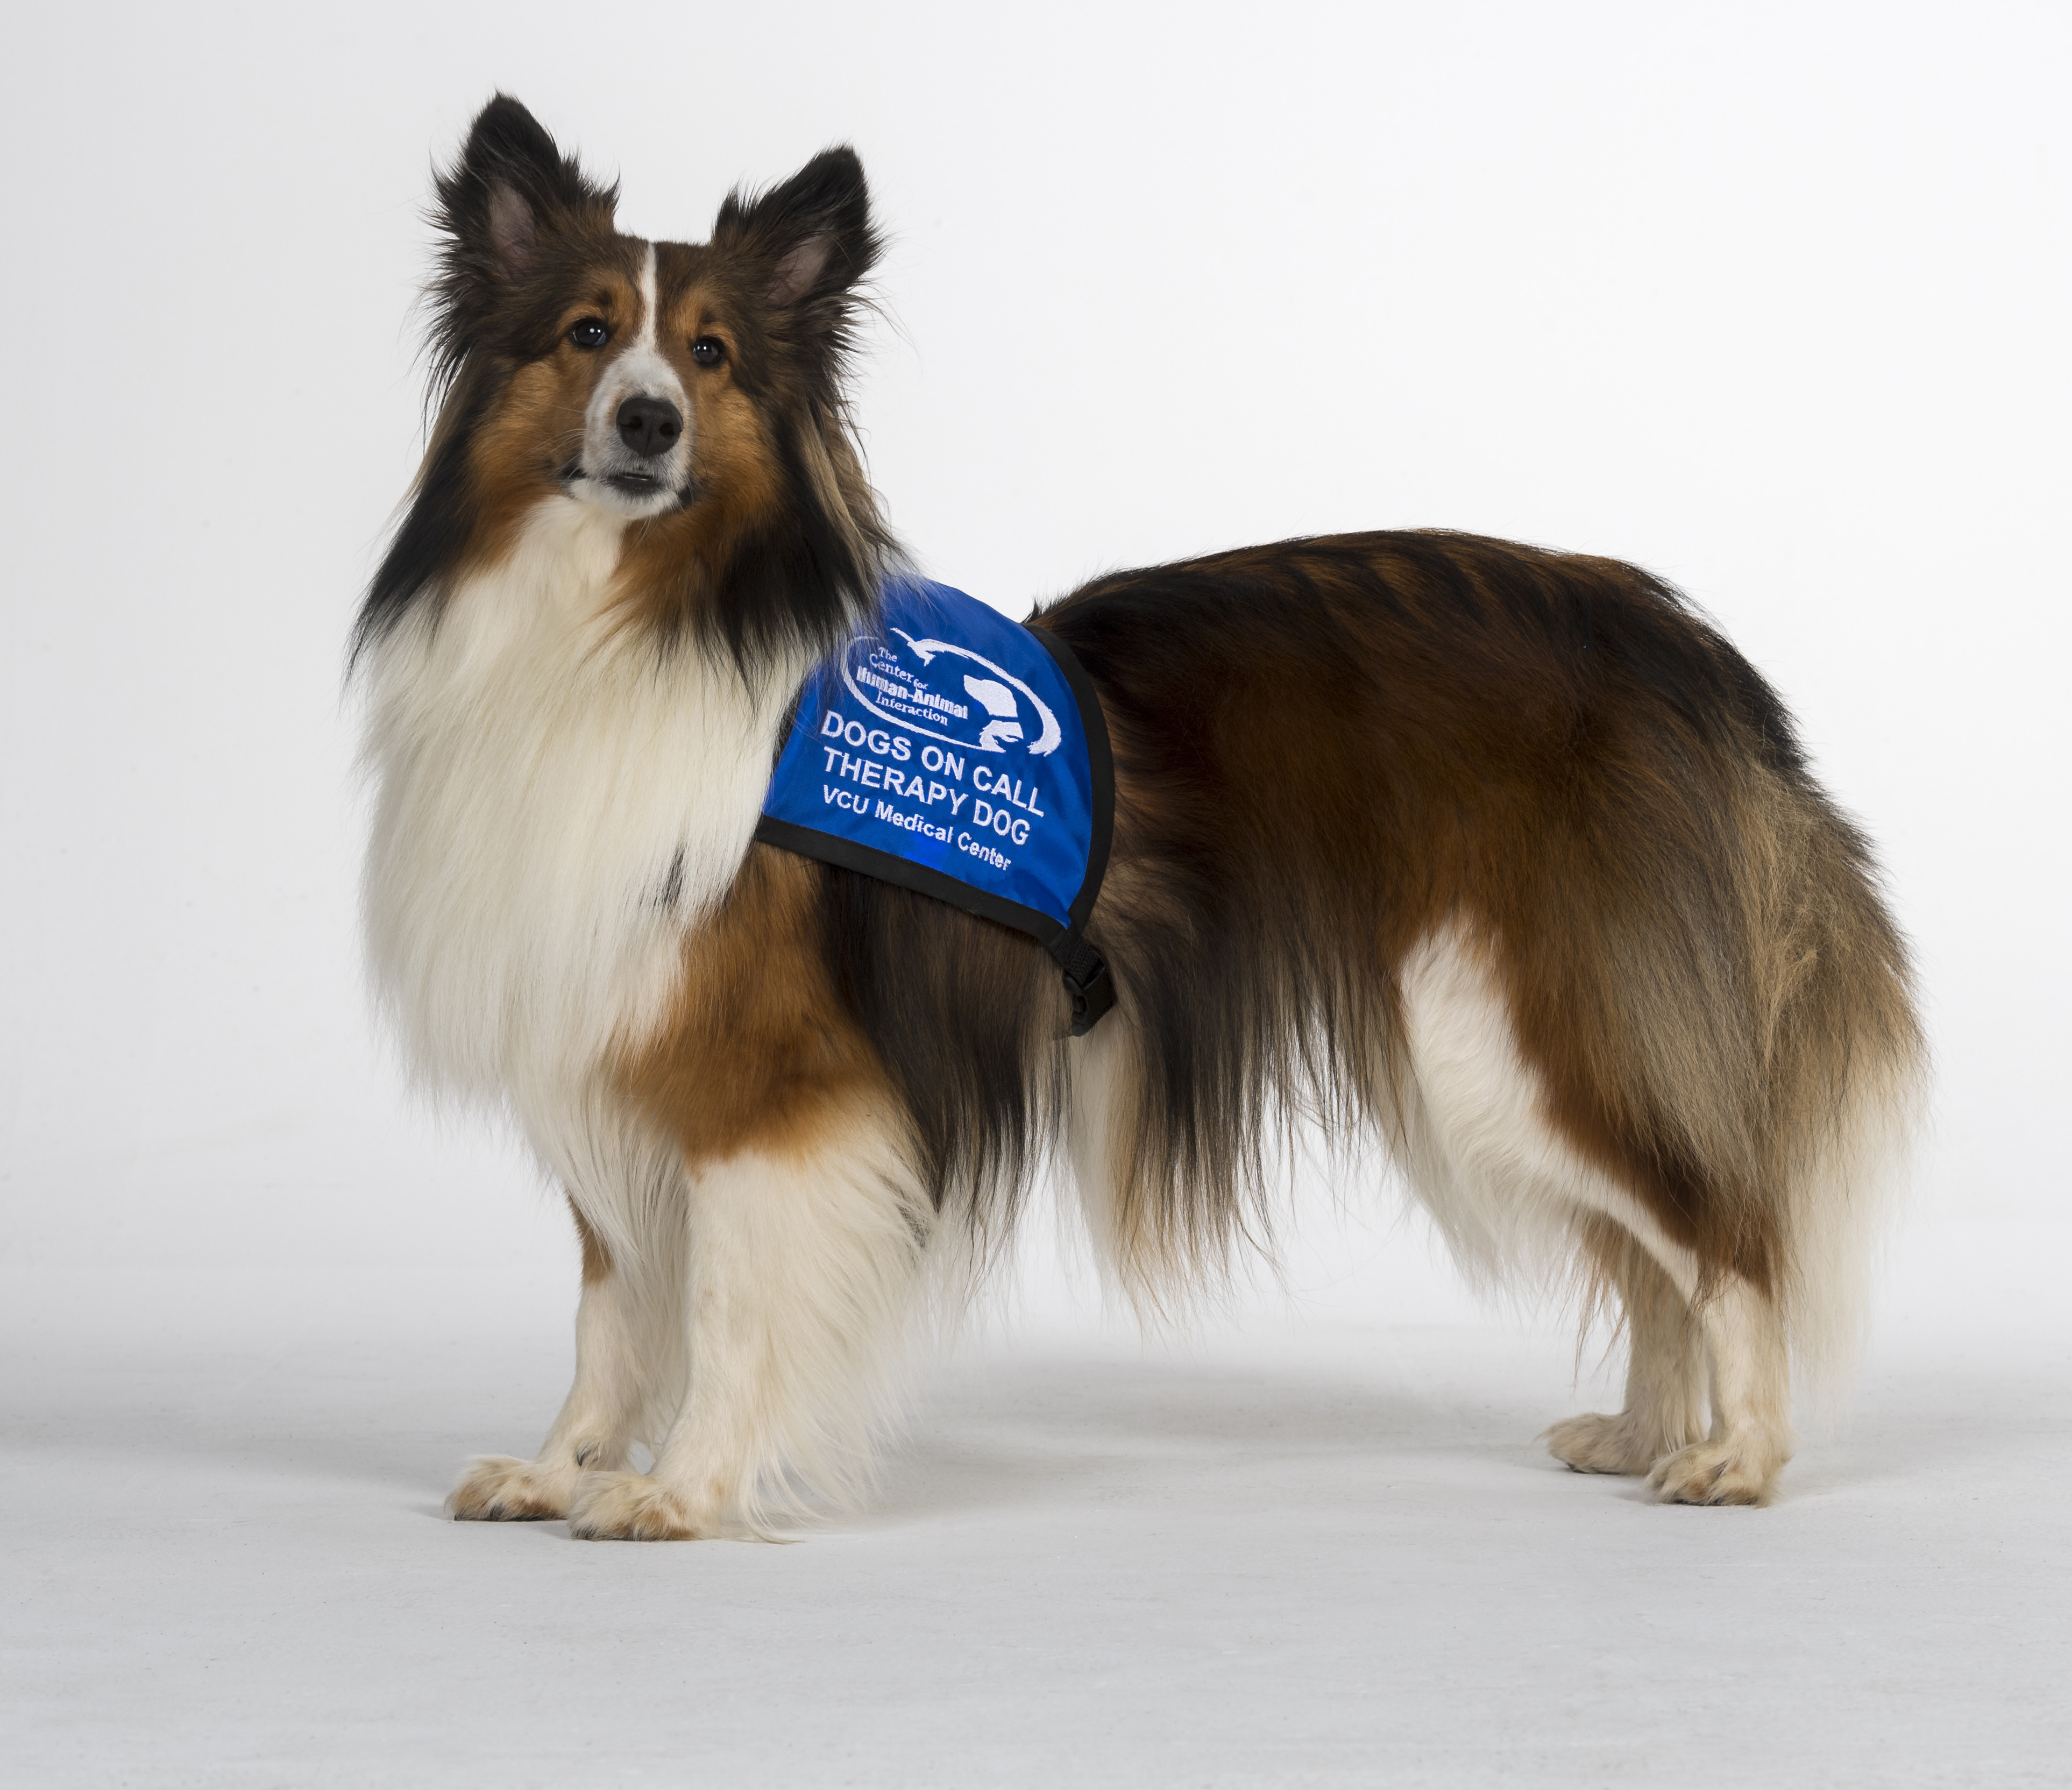 Indy—short for Dr. Indiana Bones—is a 3-year-old Sheltie in the Dogs on Call program. One of his handlers, Briton Spriggs, is a Class of 2023 medical student. (Photo by Allen Jones, VCU University Relations)